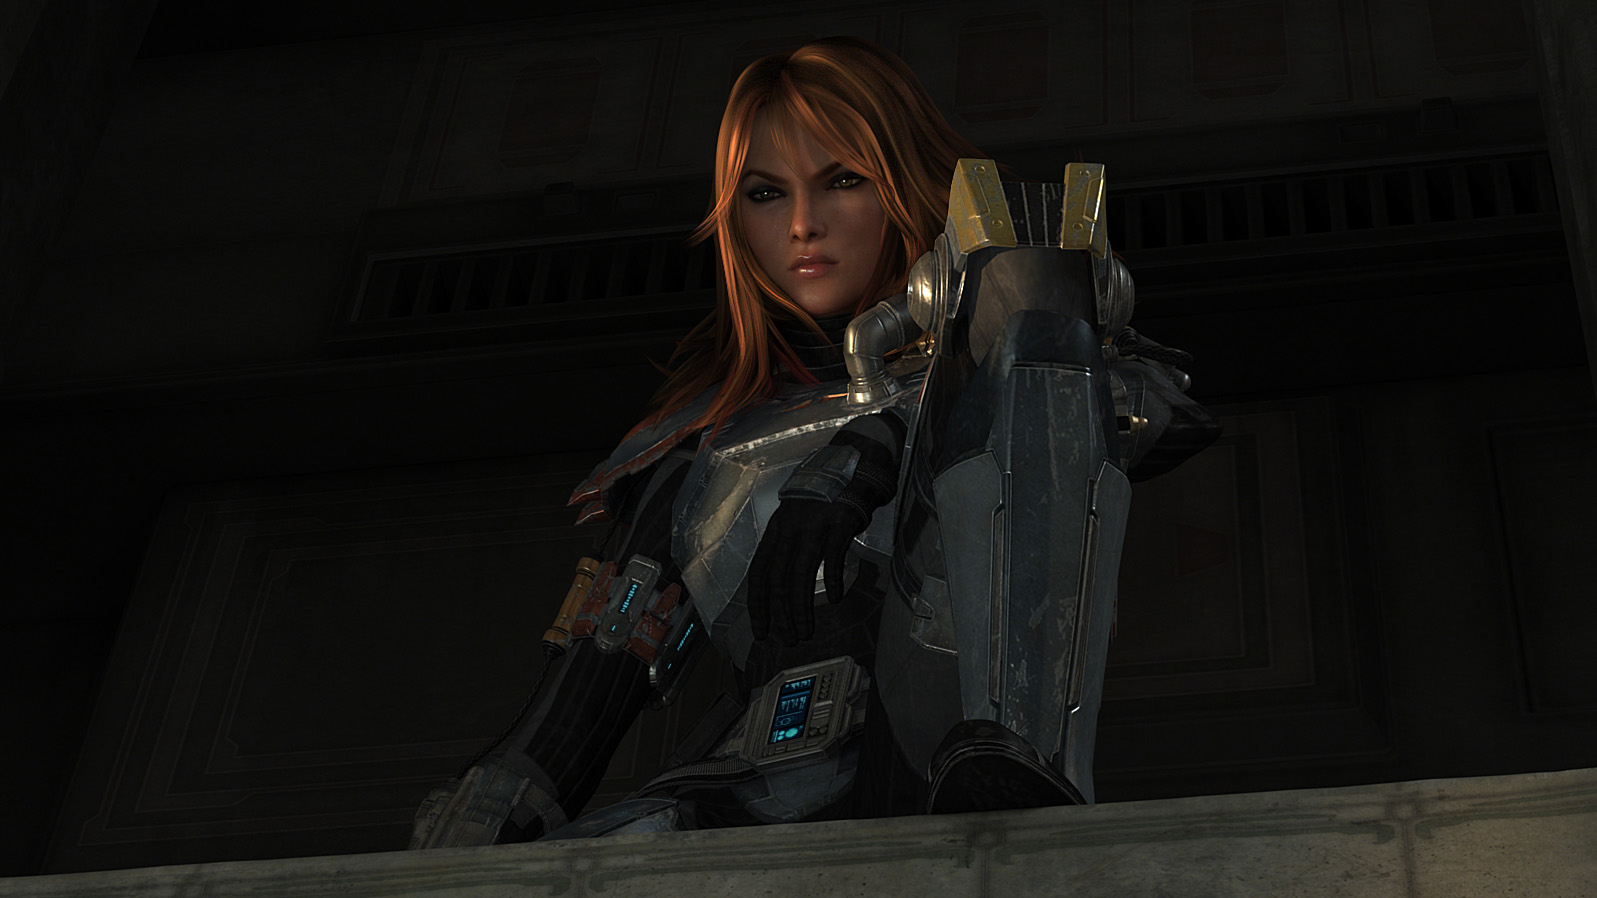  Vizla Mark II started As she now actually appears in SWTOR   Page 3 1597x898